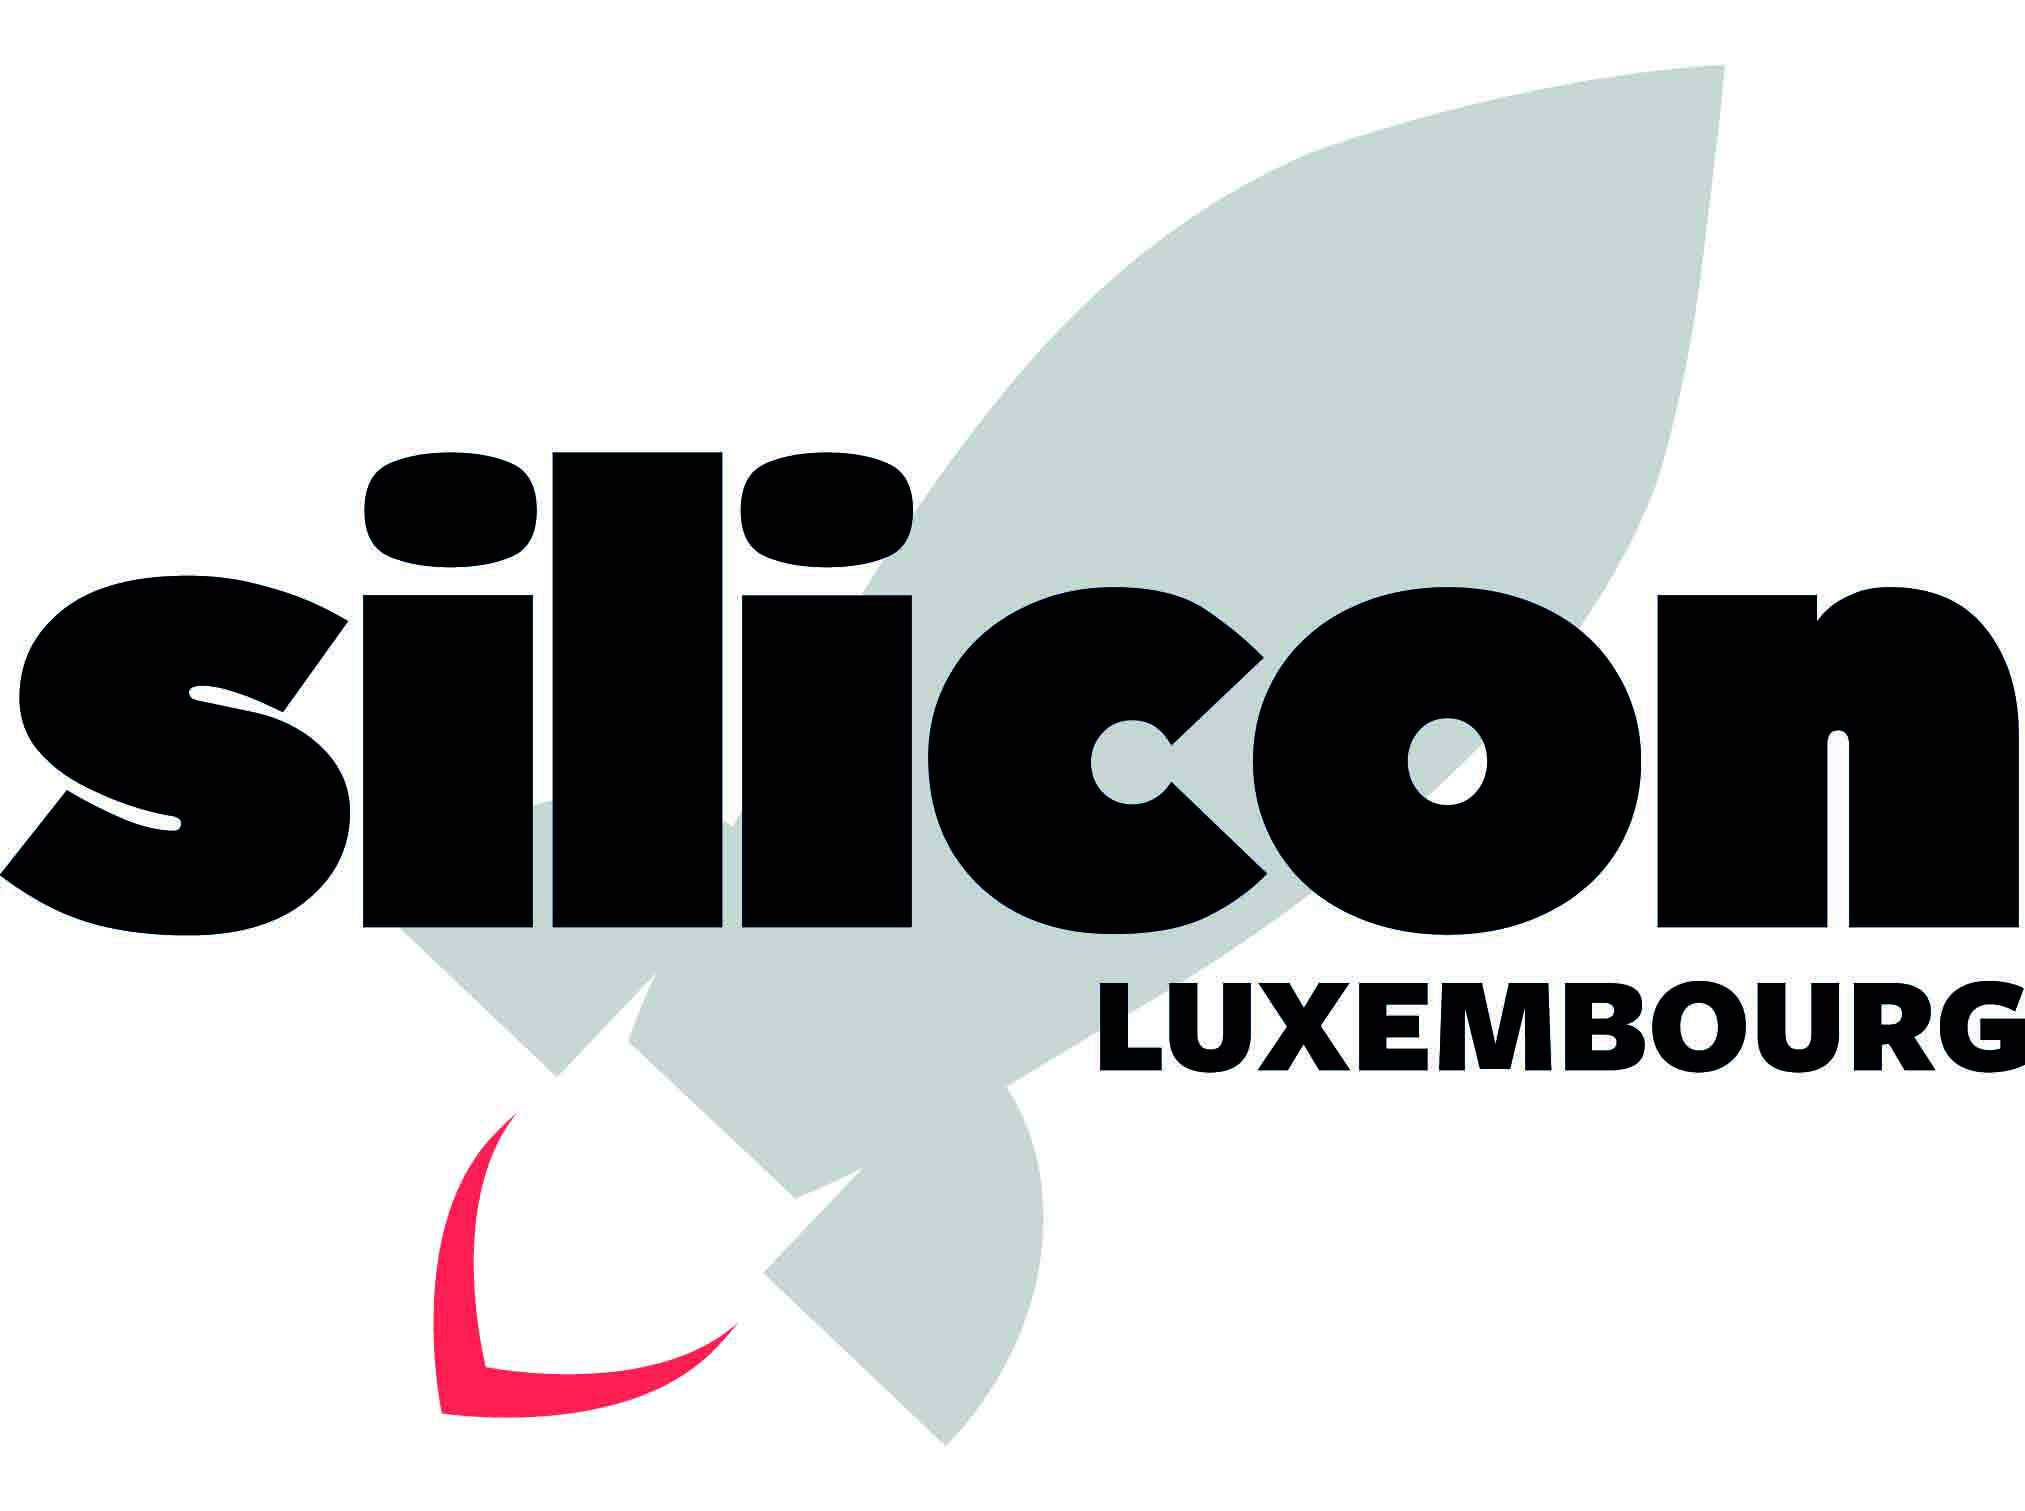 Silicon Luxembourg